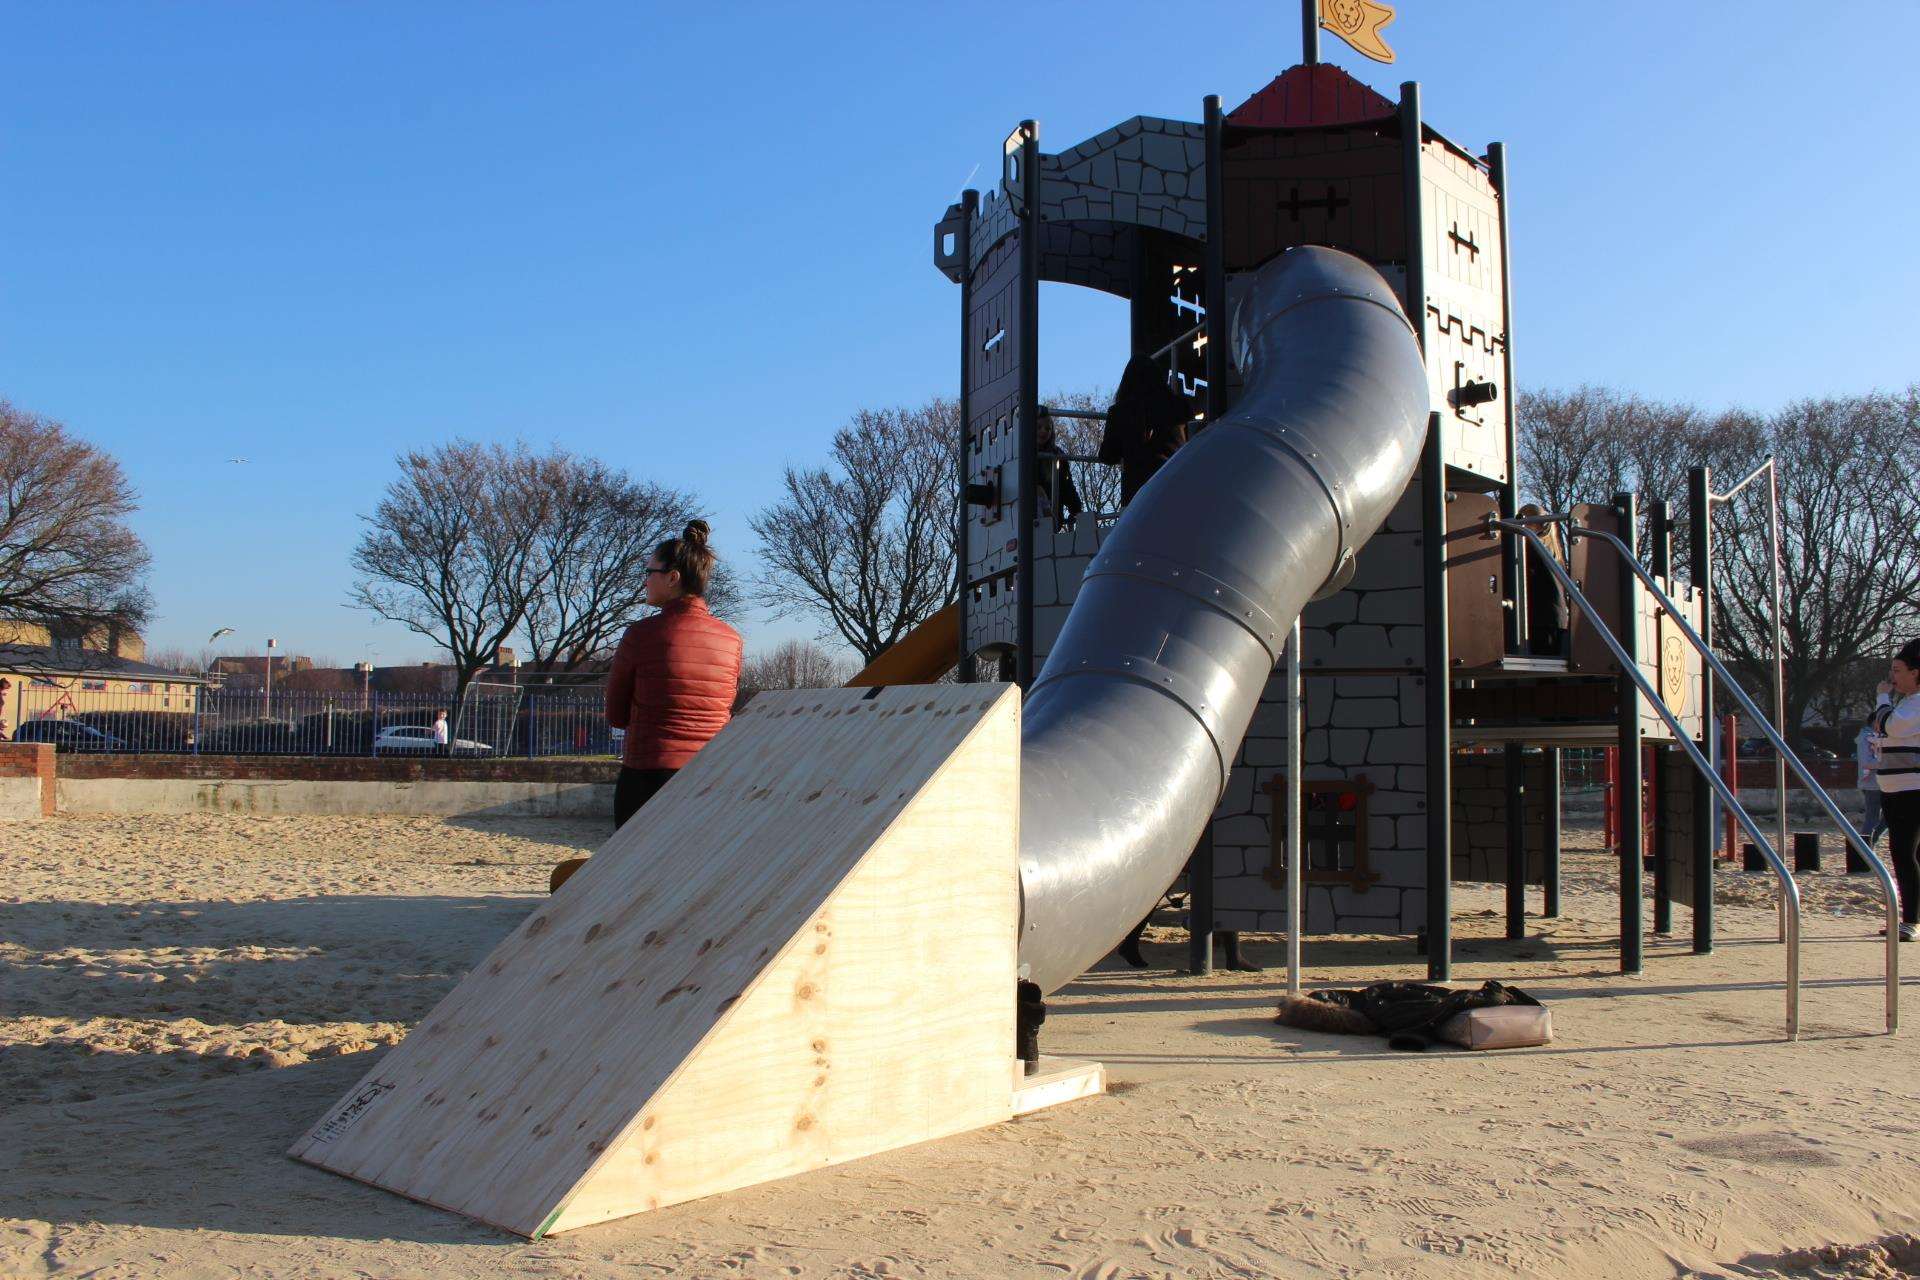 Closed: the castle slide at Beachfields, Sheerness (7440590)